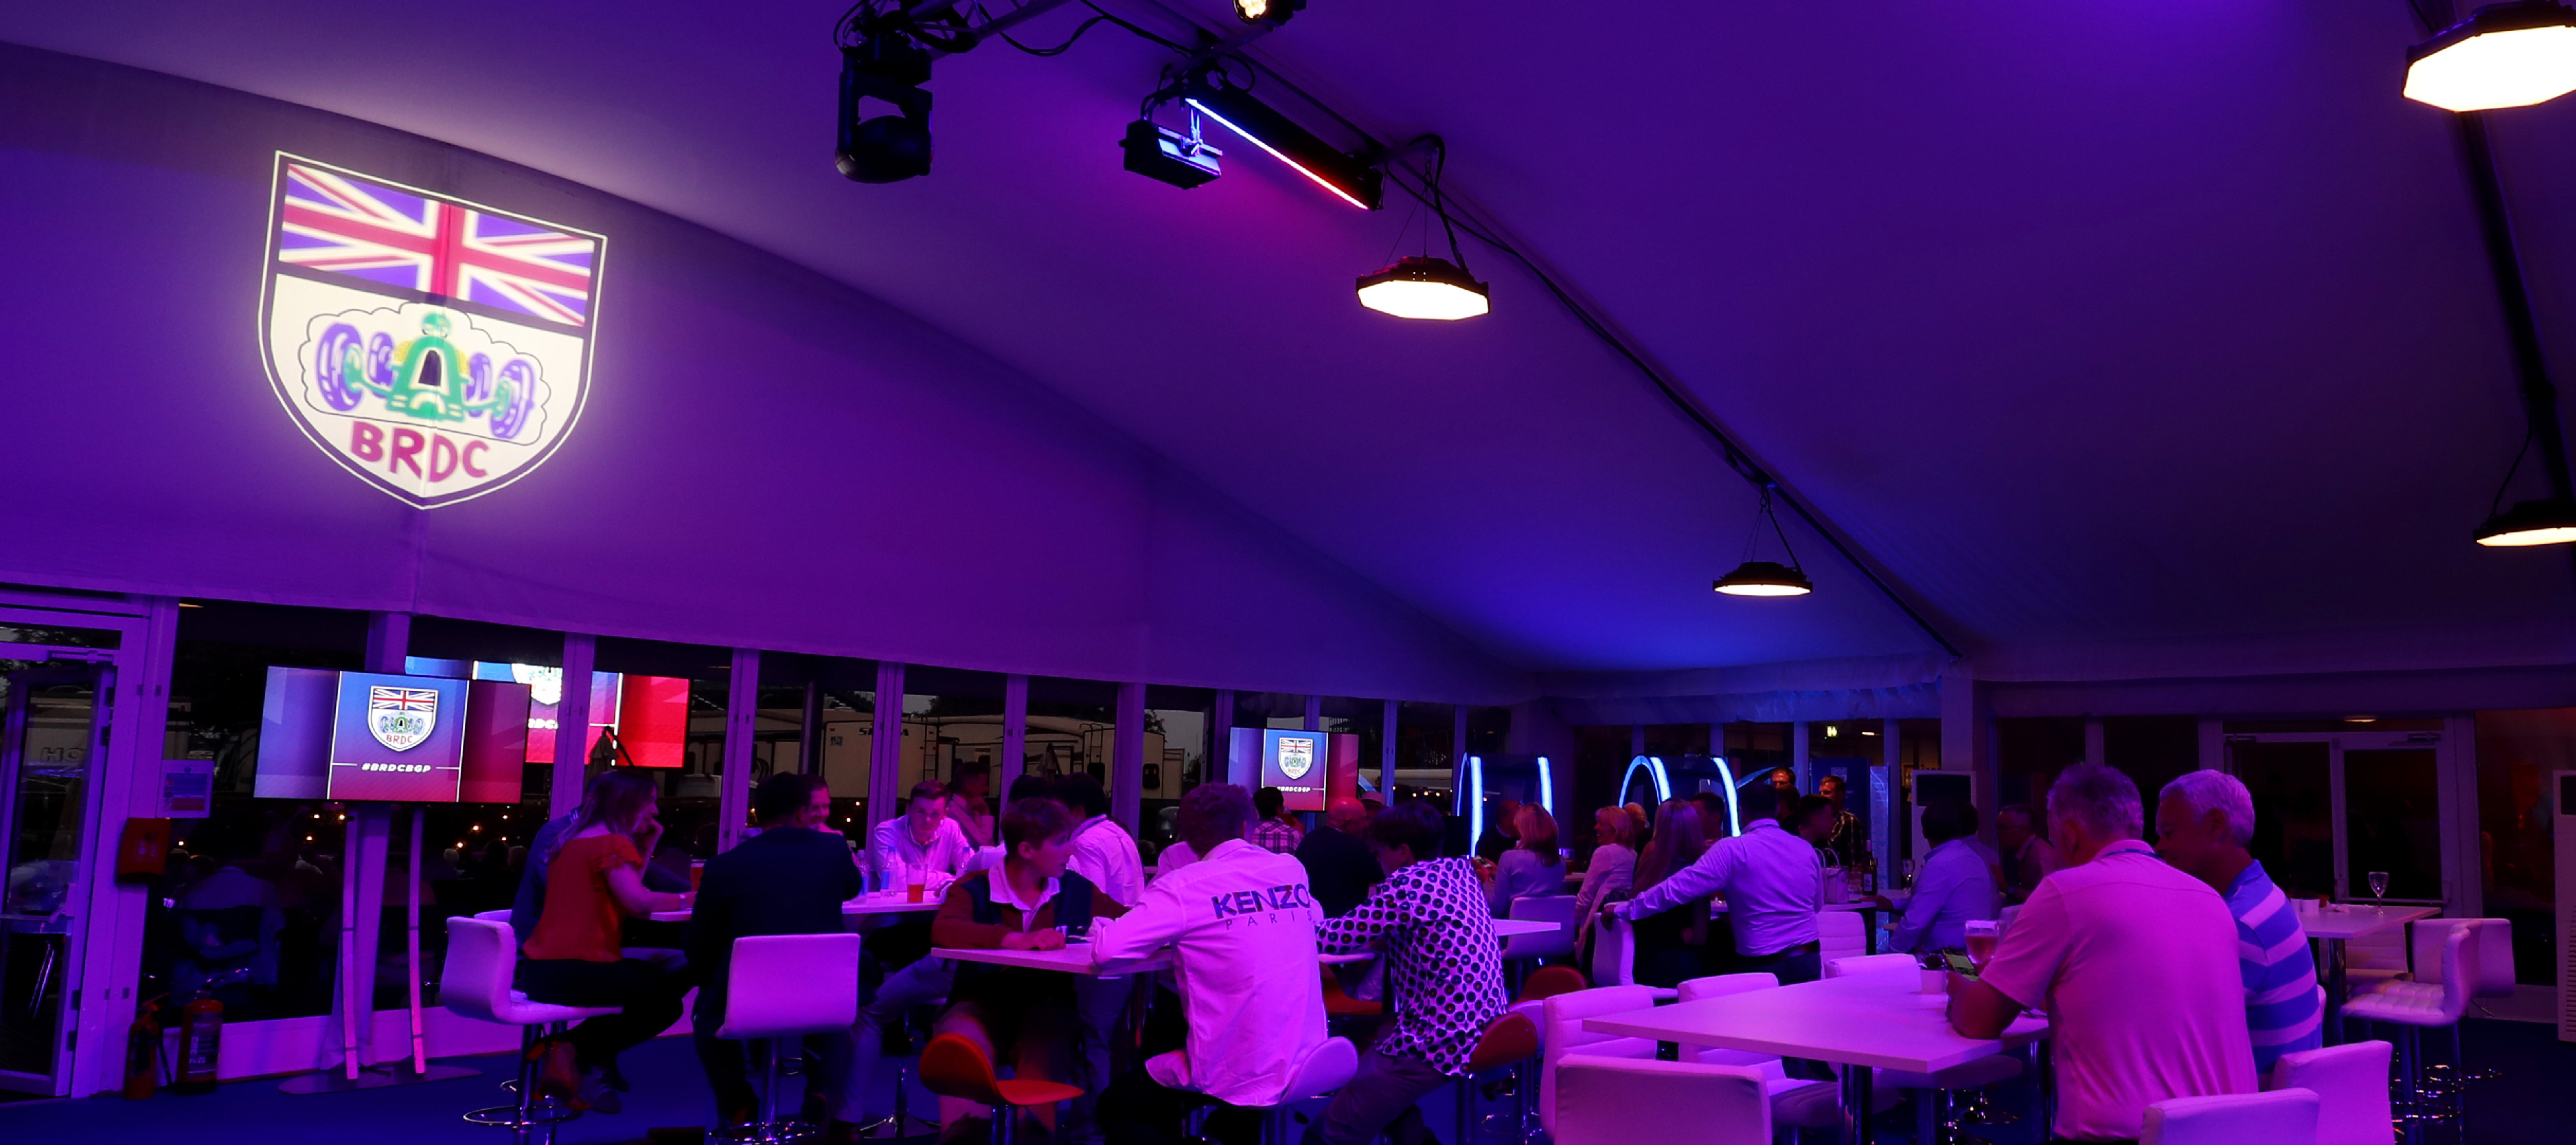 Chroma-Q Solutions Deliver a Winning Performance for Silverstone’s BRDC British Grand Prix Party Celebrations